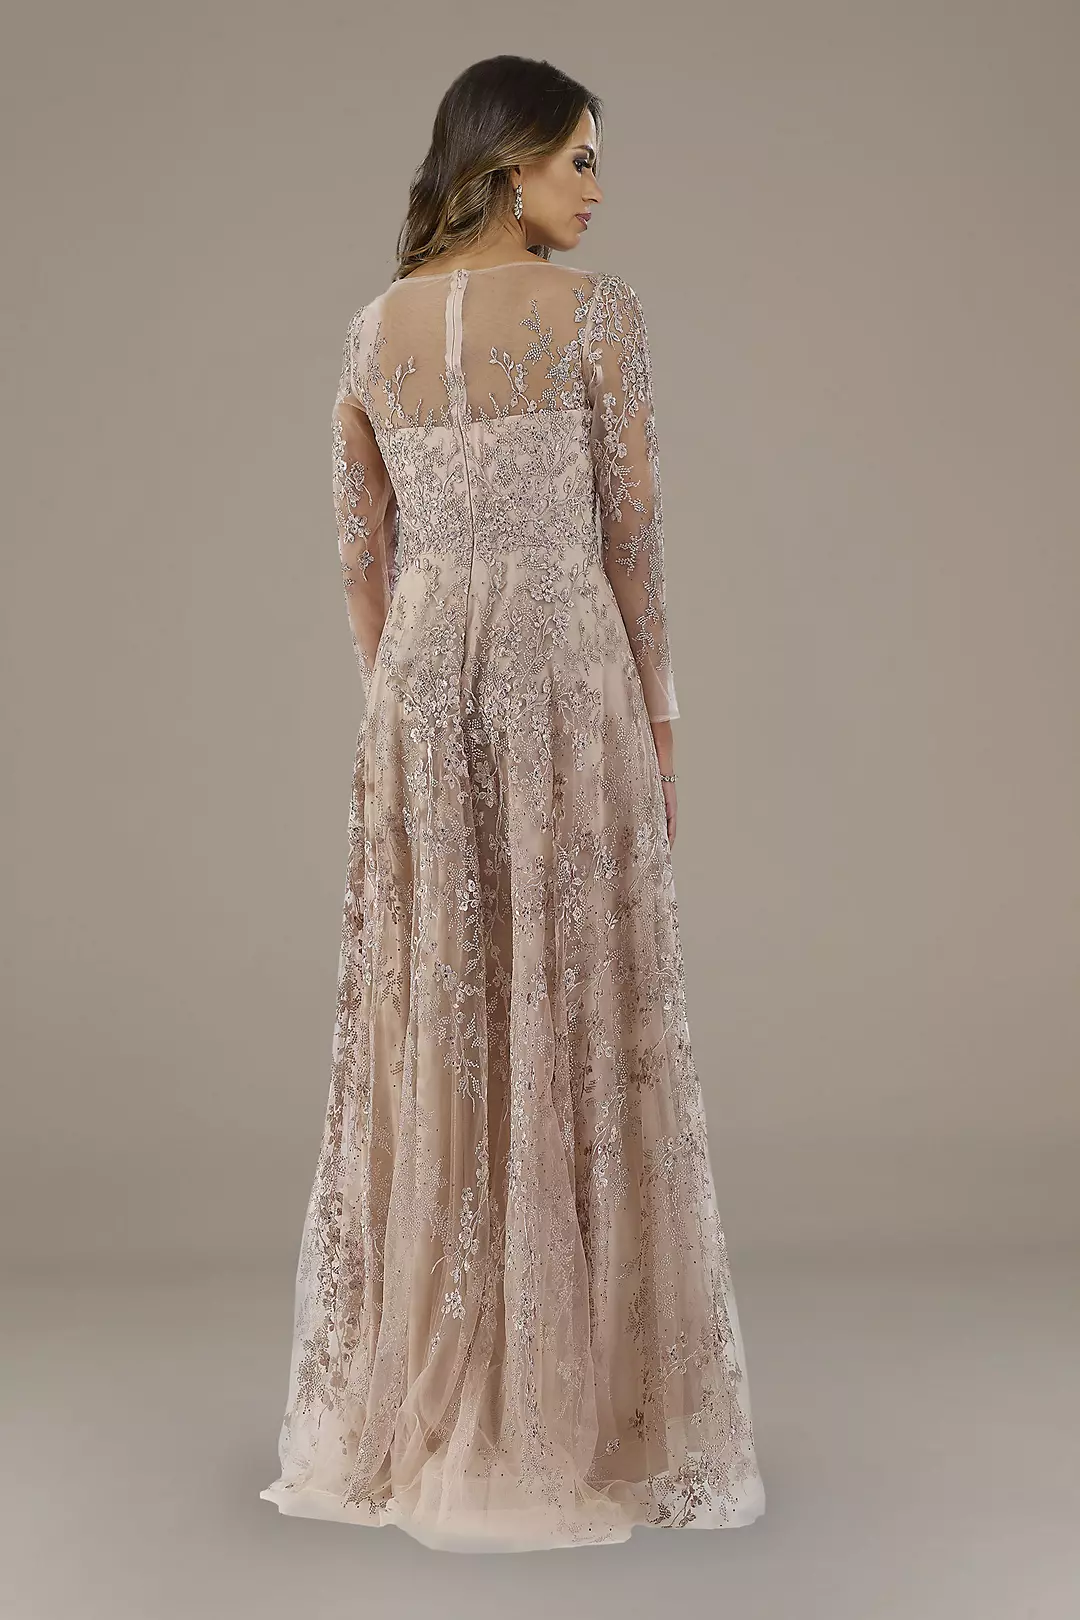 Lara Evette Lace A-Line Long Sleeve Gown Image 2